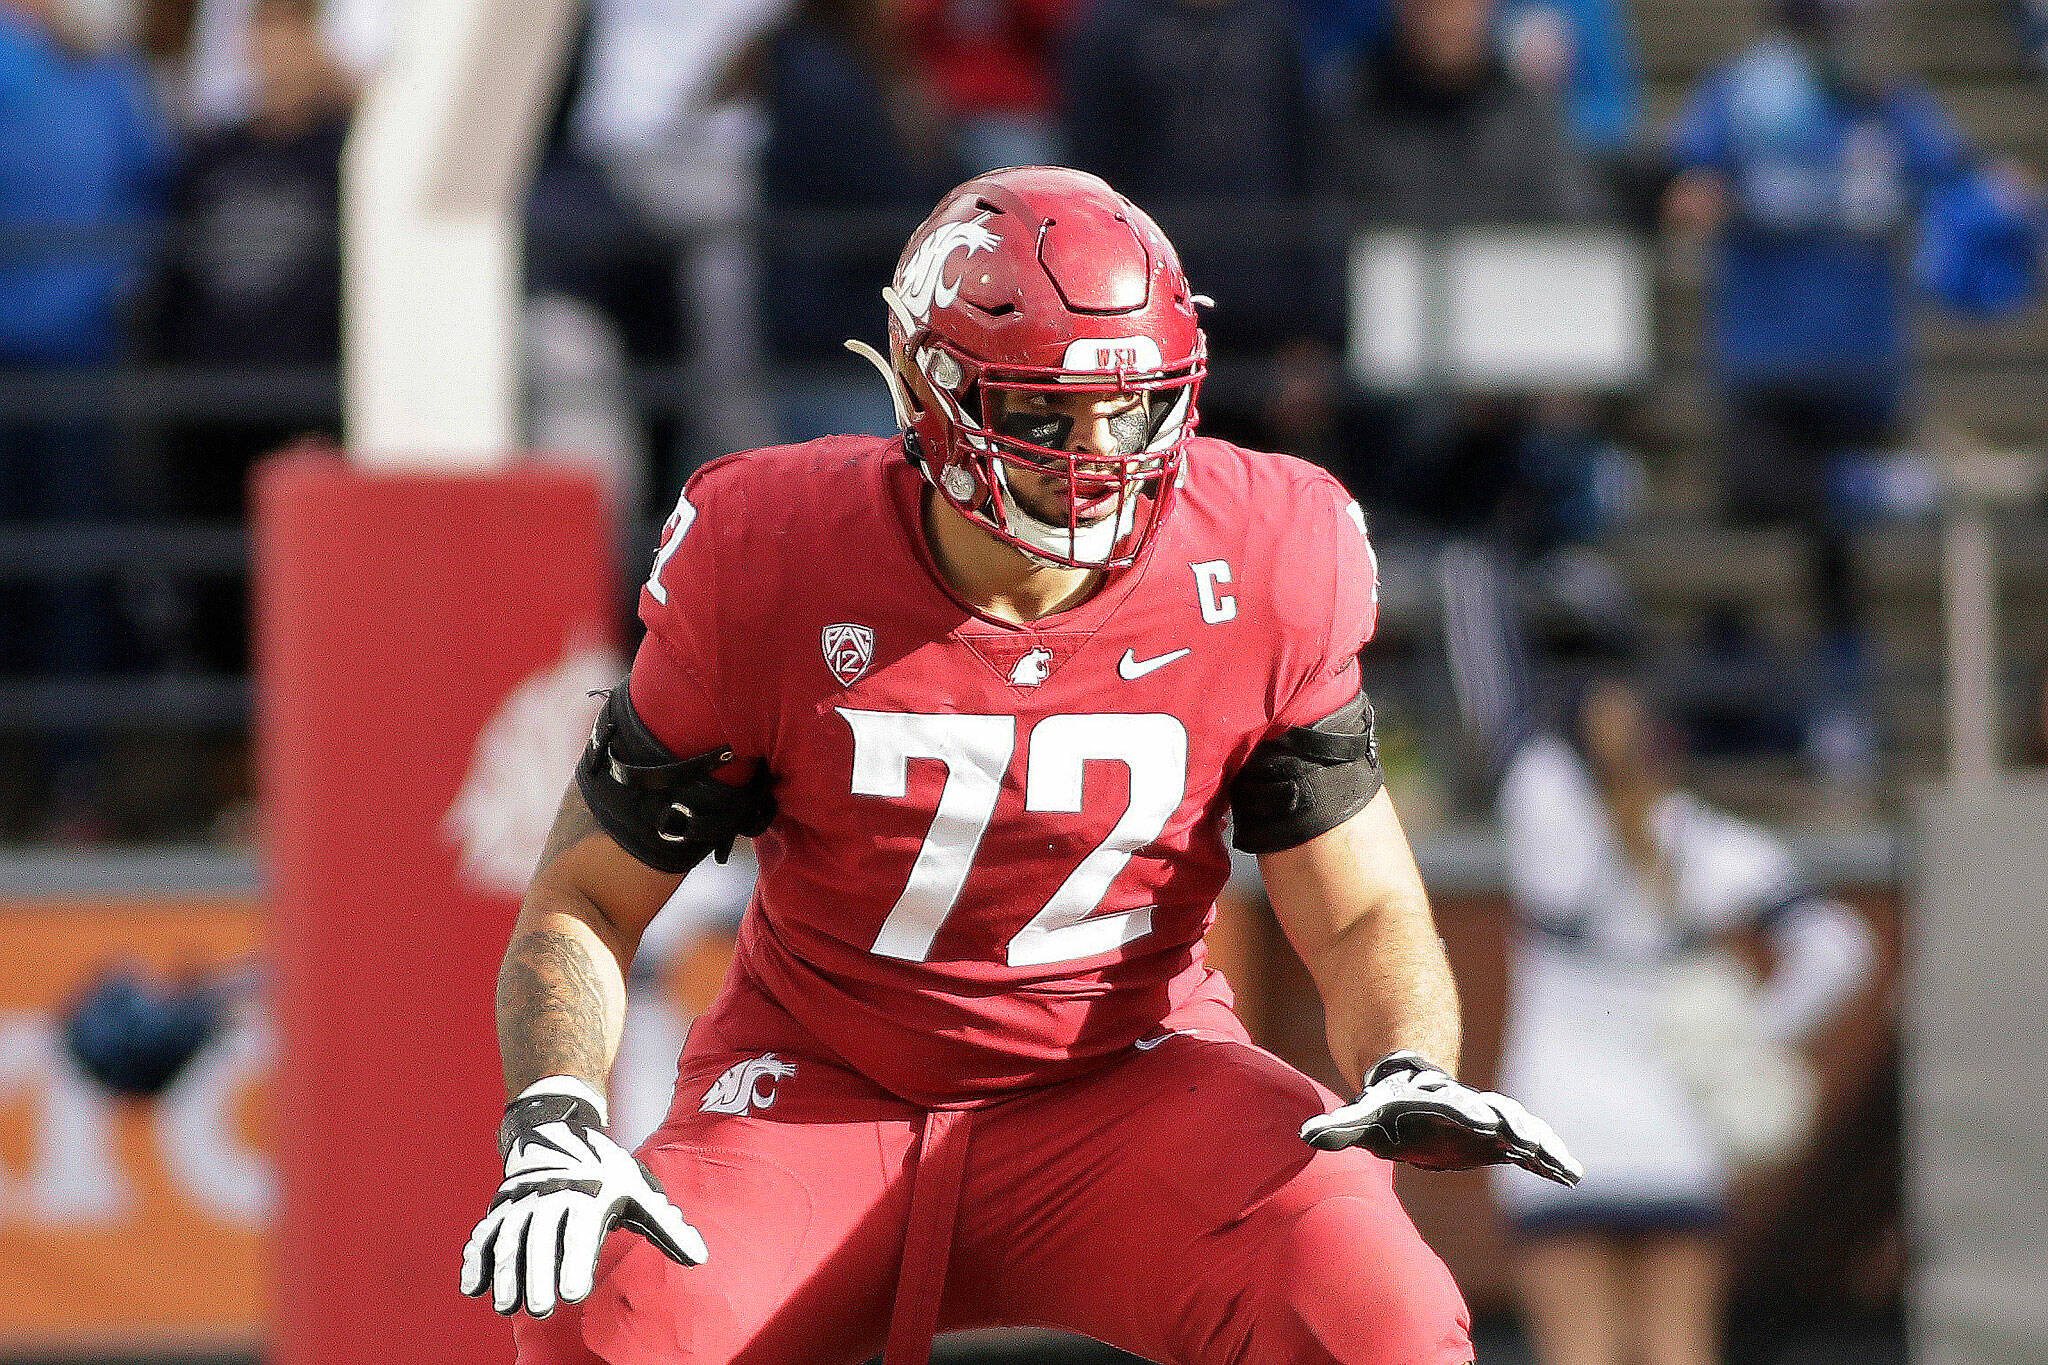 Washington State offensive tackle Abraham Lucas, an Archbishop Murphy alum, prepares to block during a game against BYU in 2021 in Pullman. (AP Photo/Young Kwak)